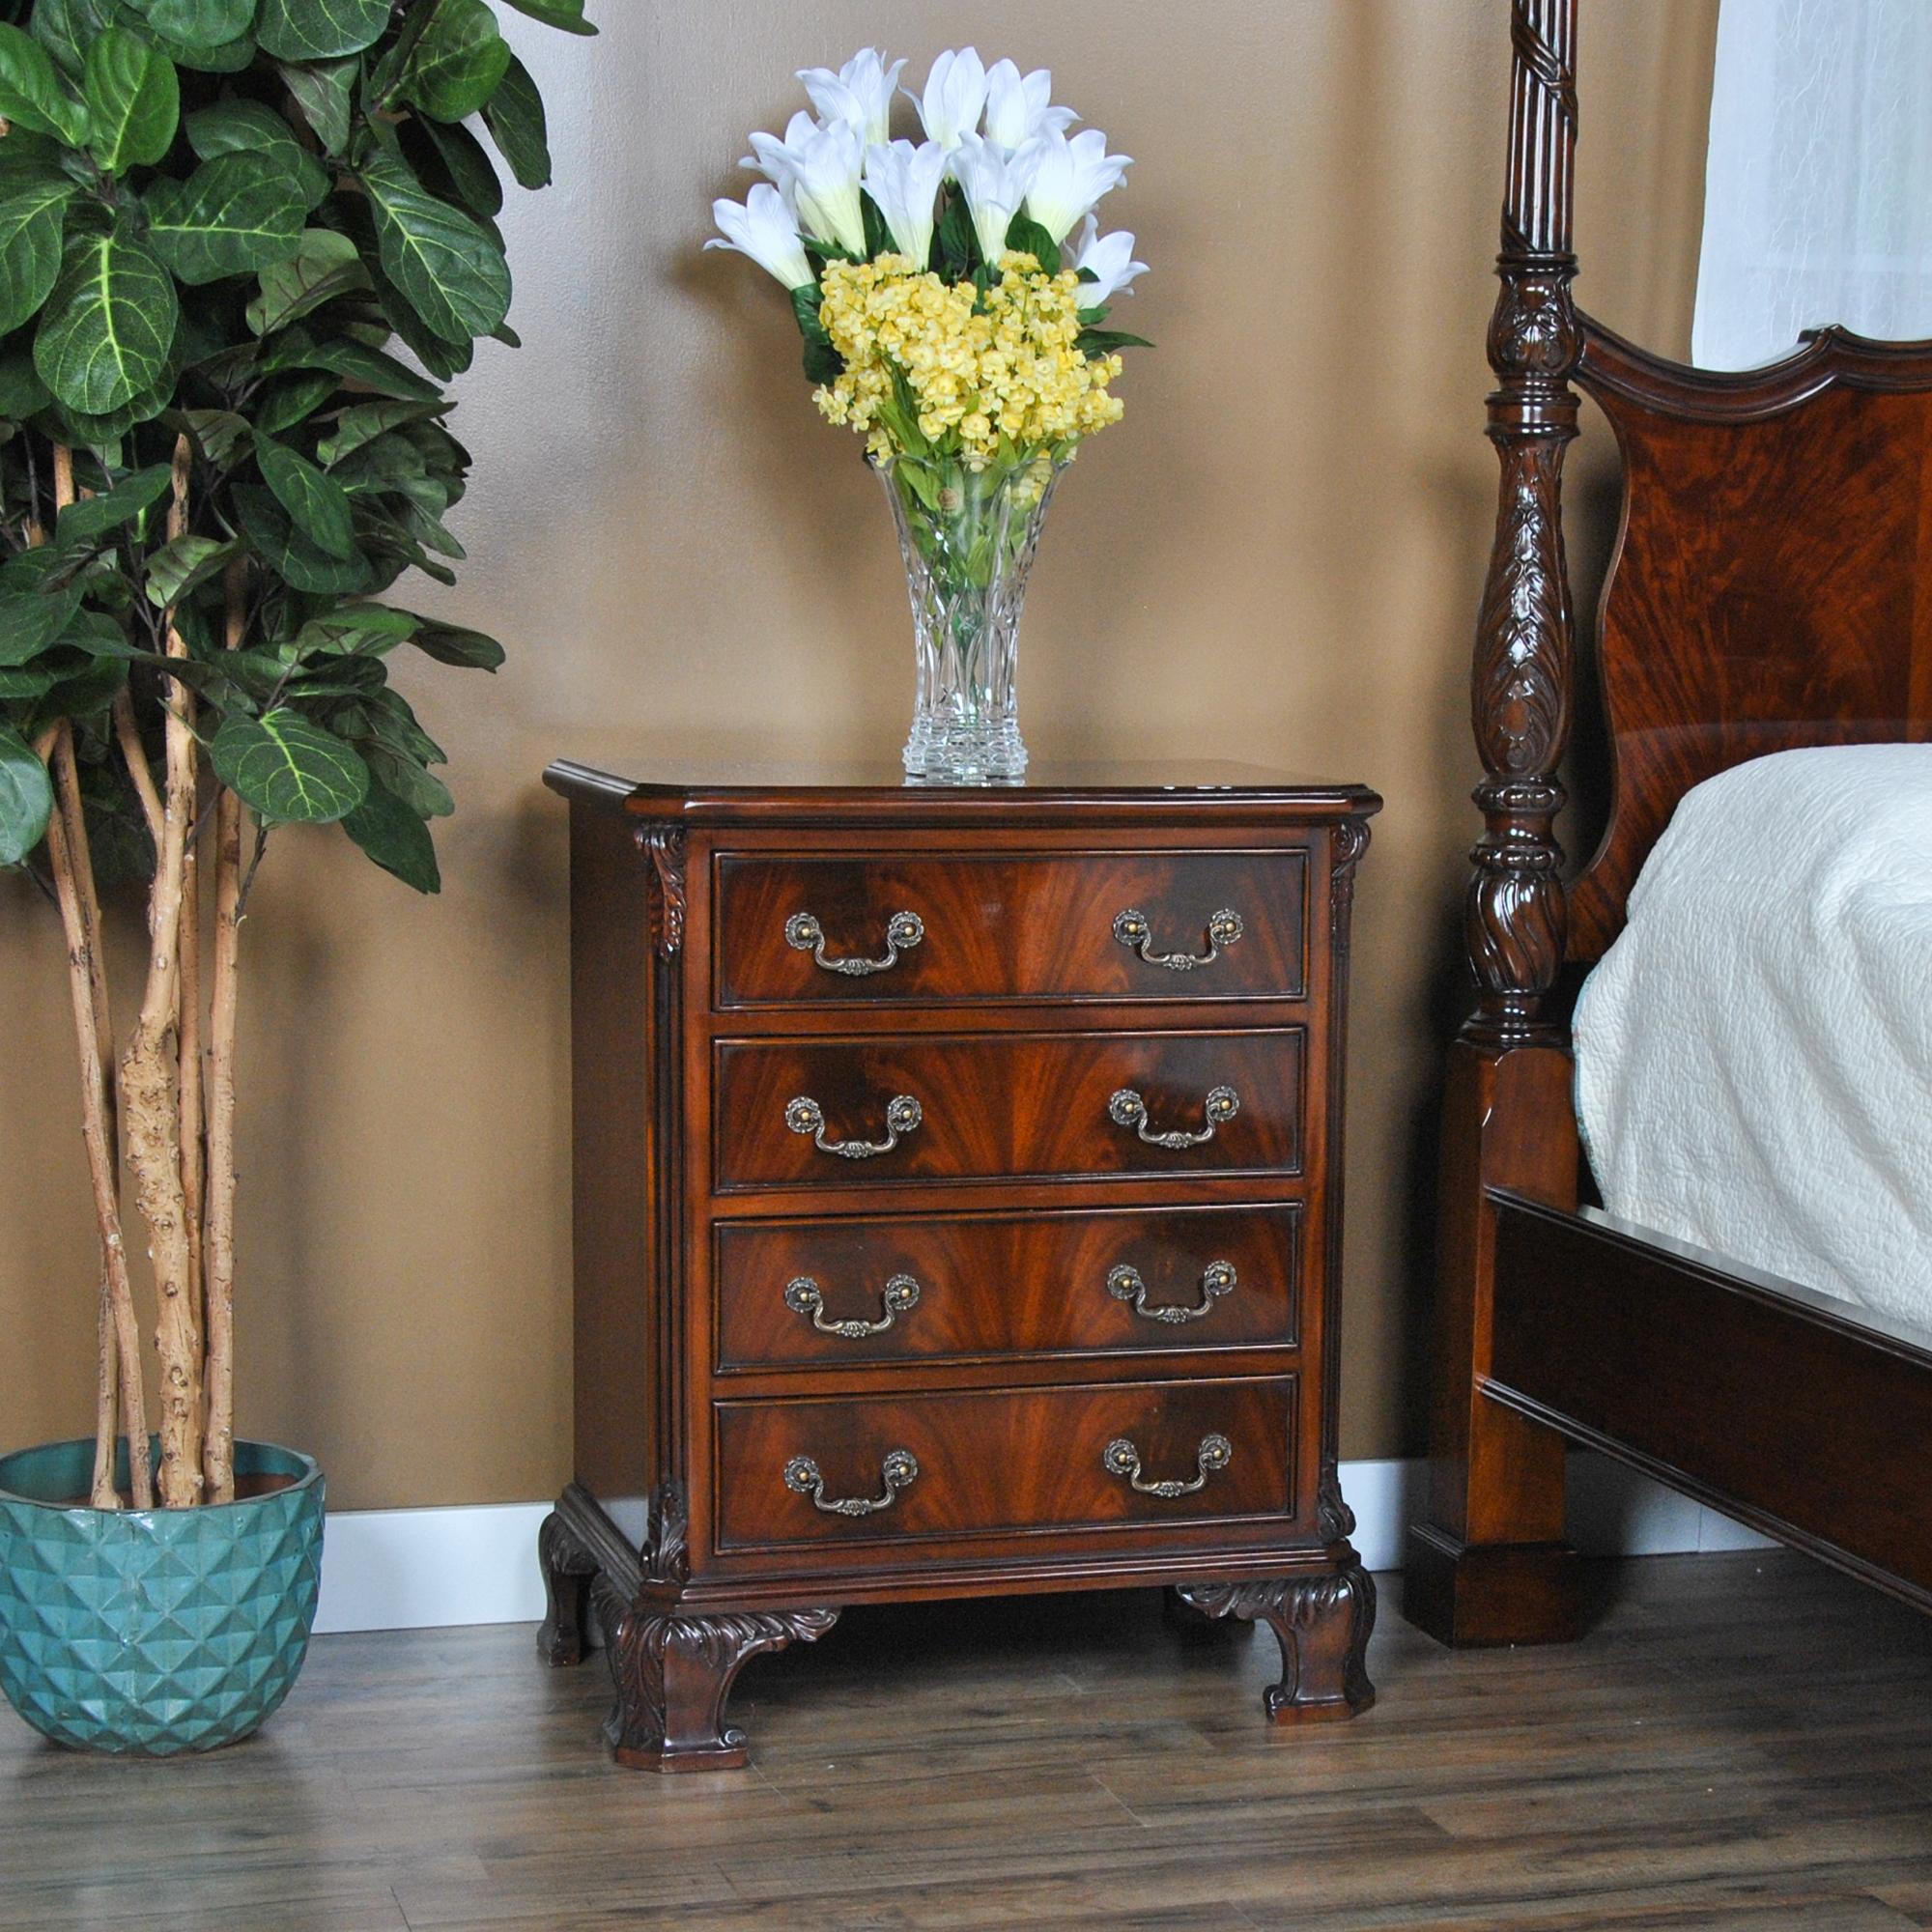 A fine quality Chippendale Night Stand featuring hand carved, solid mahogany details as well as dovetailed drawers. Fine quality drawer fronts create a beautiful pattern, accented by antique style hardware. Taller than most of our night stands this